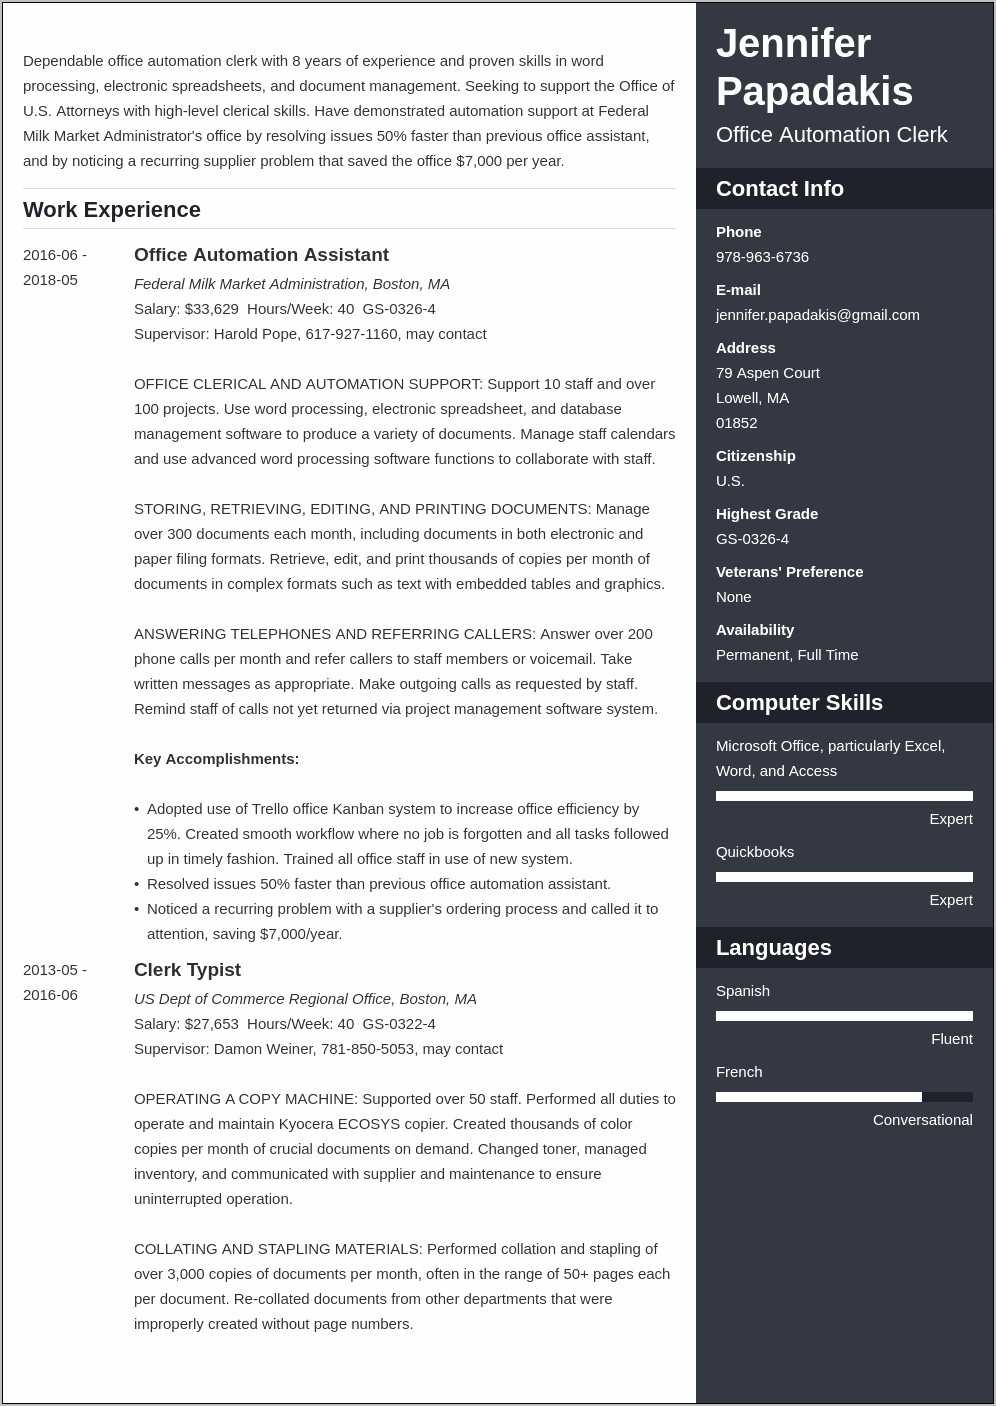 Send Customized And Federal Resume For Federal Job